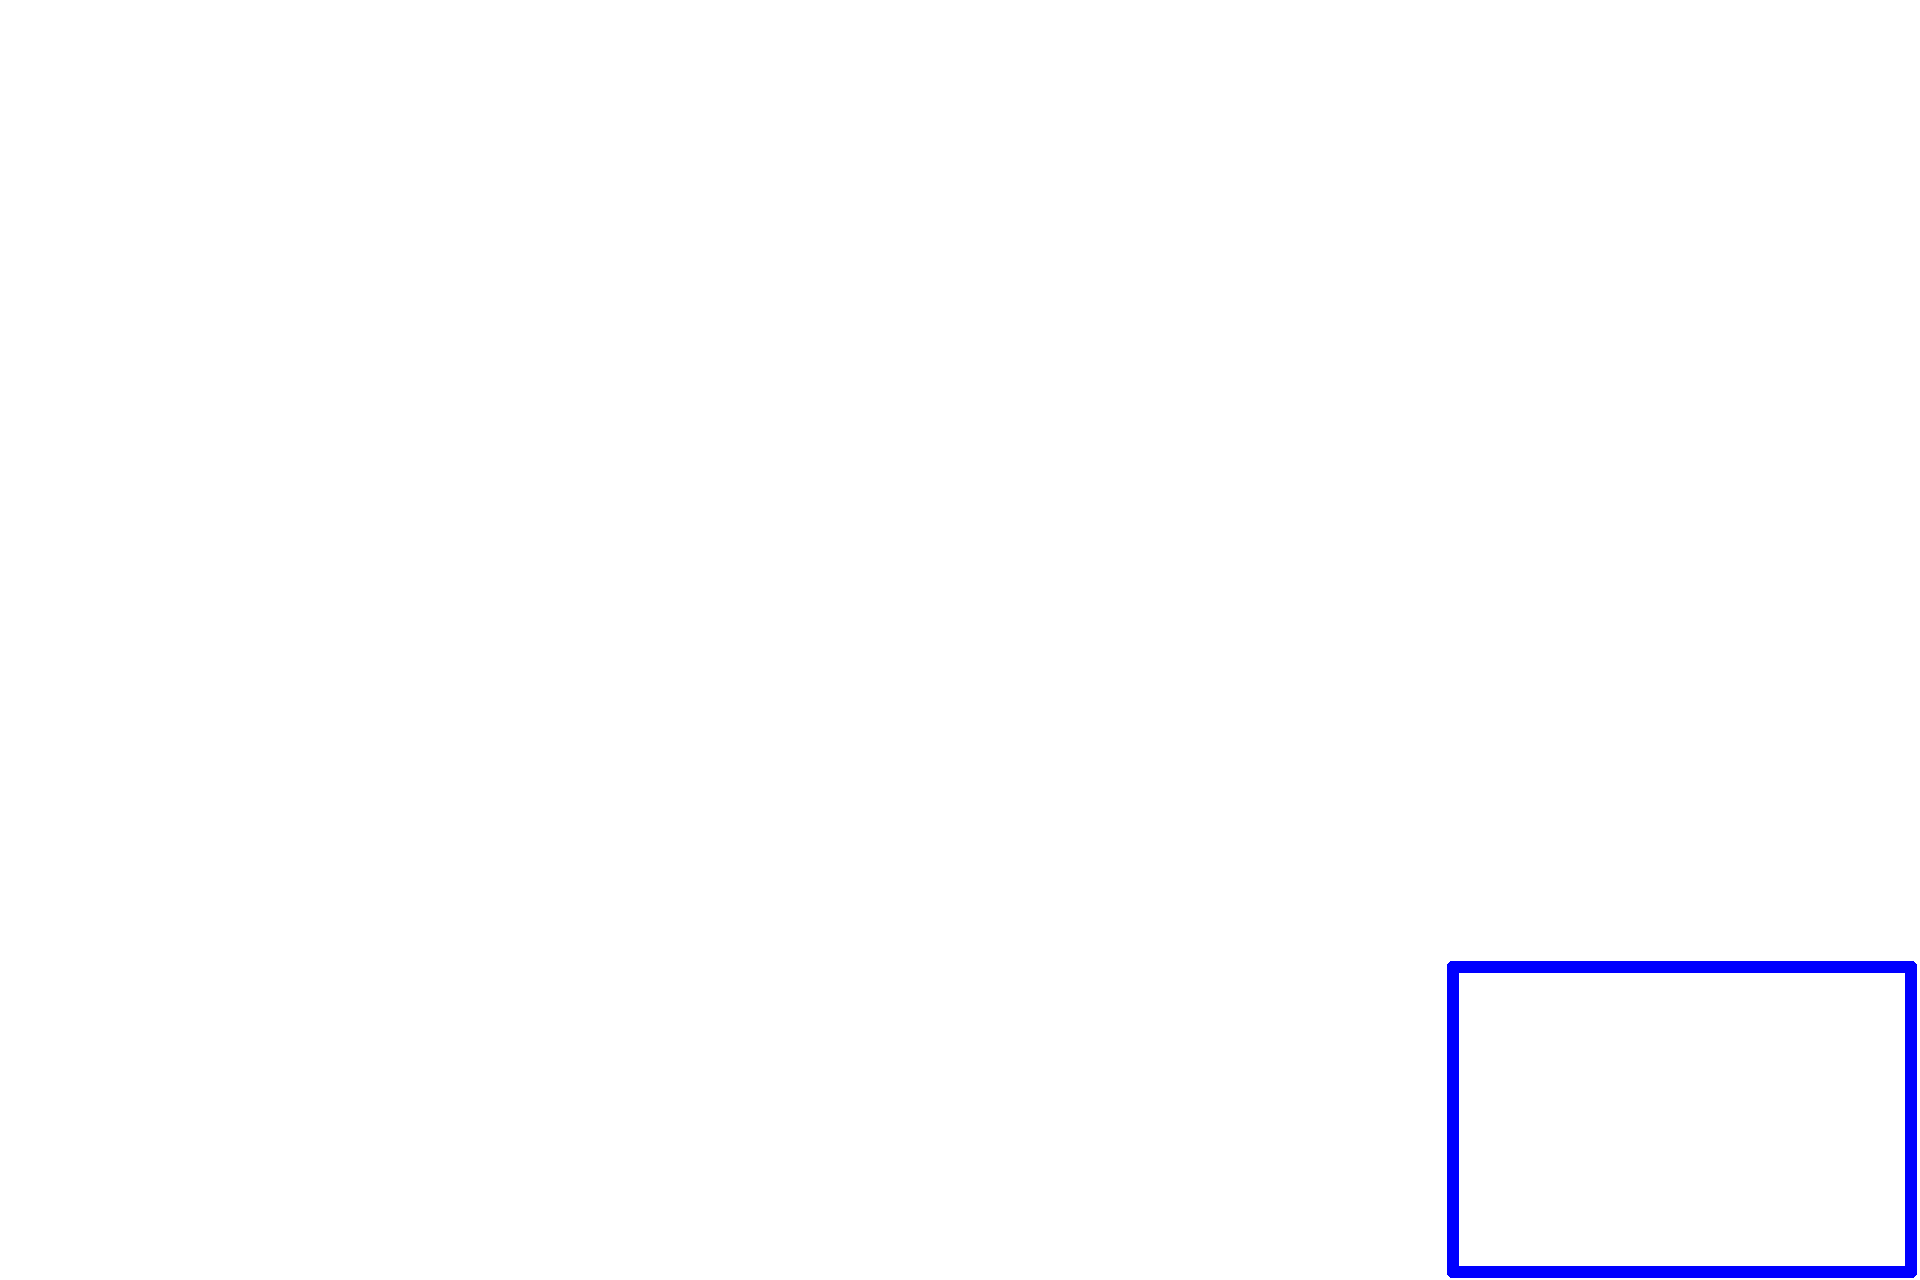 Area shown in next image > <p>The area indicated by the rectangle is shown at higher magnification in the next image.</p>
